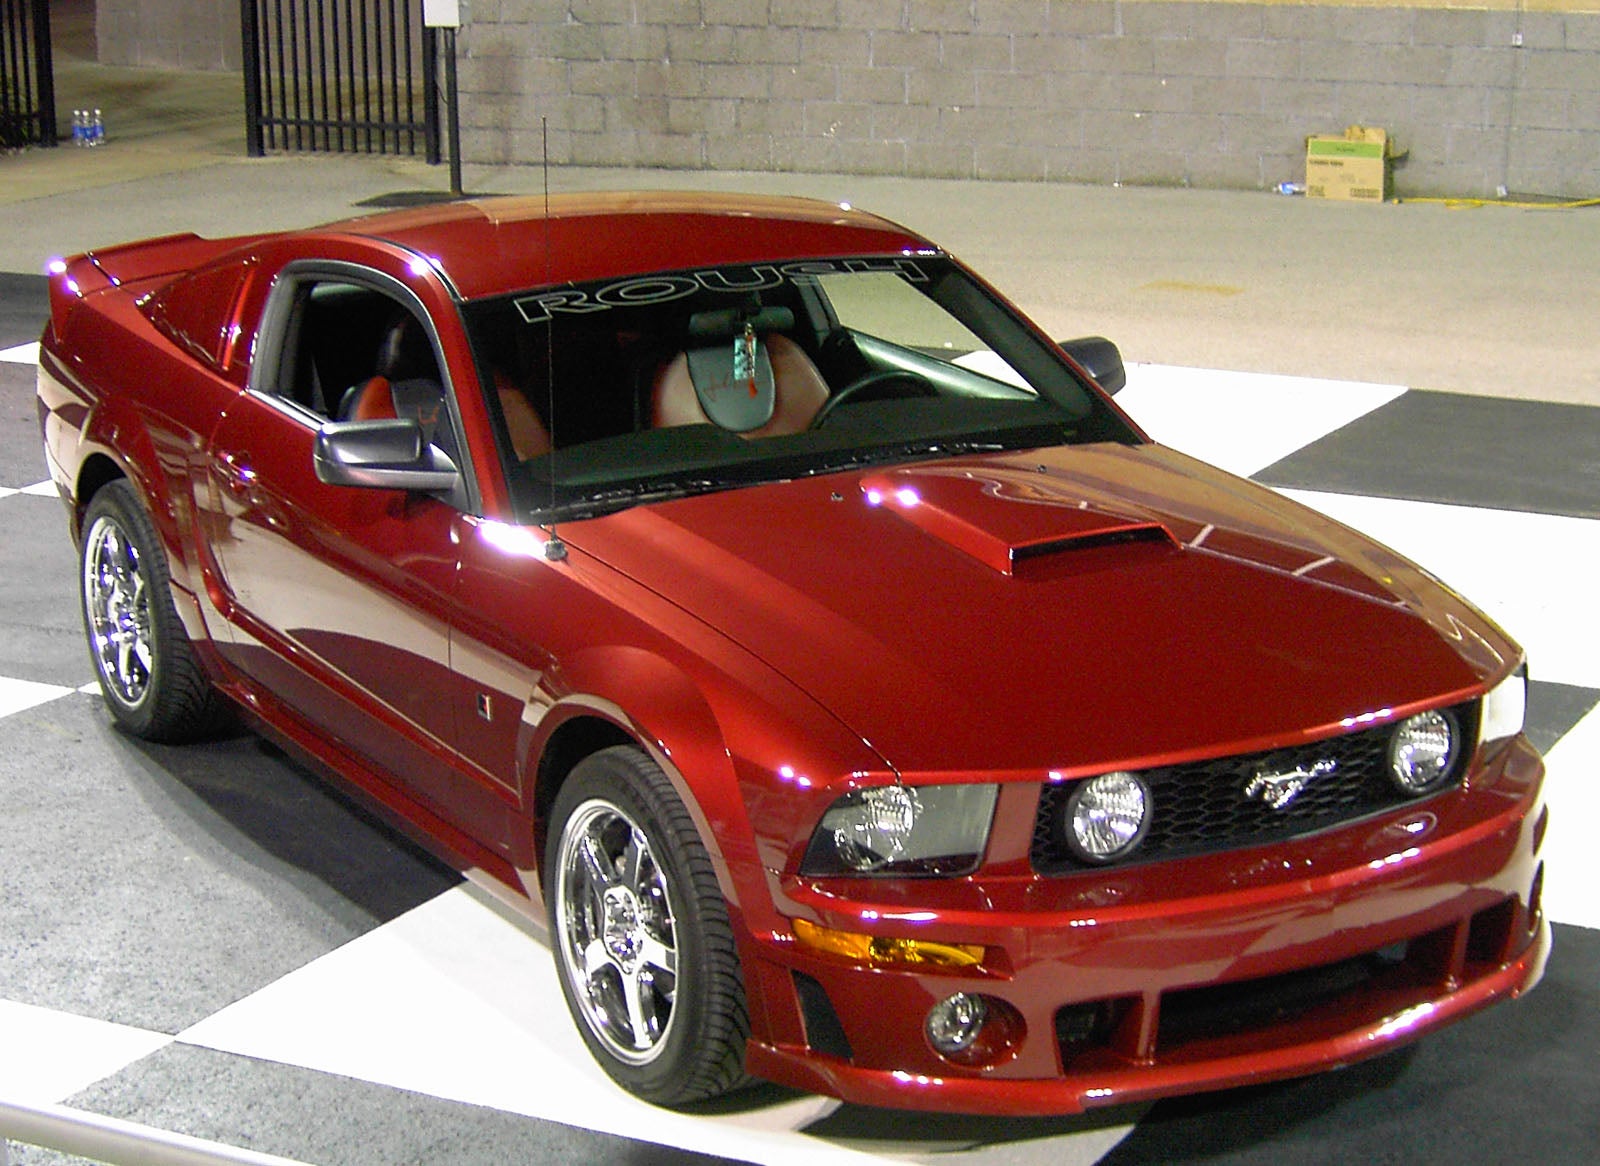 2006_ford_mustang pic 2467170596773378995